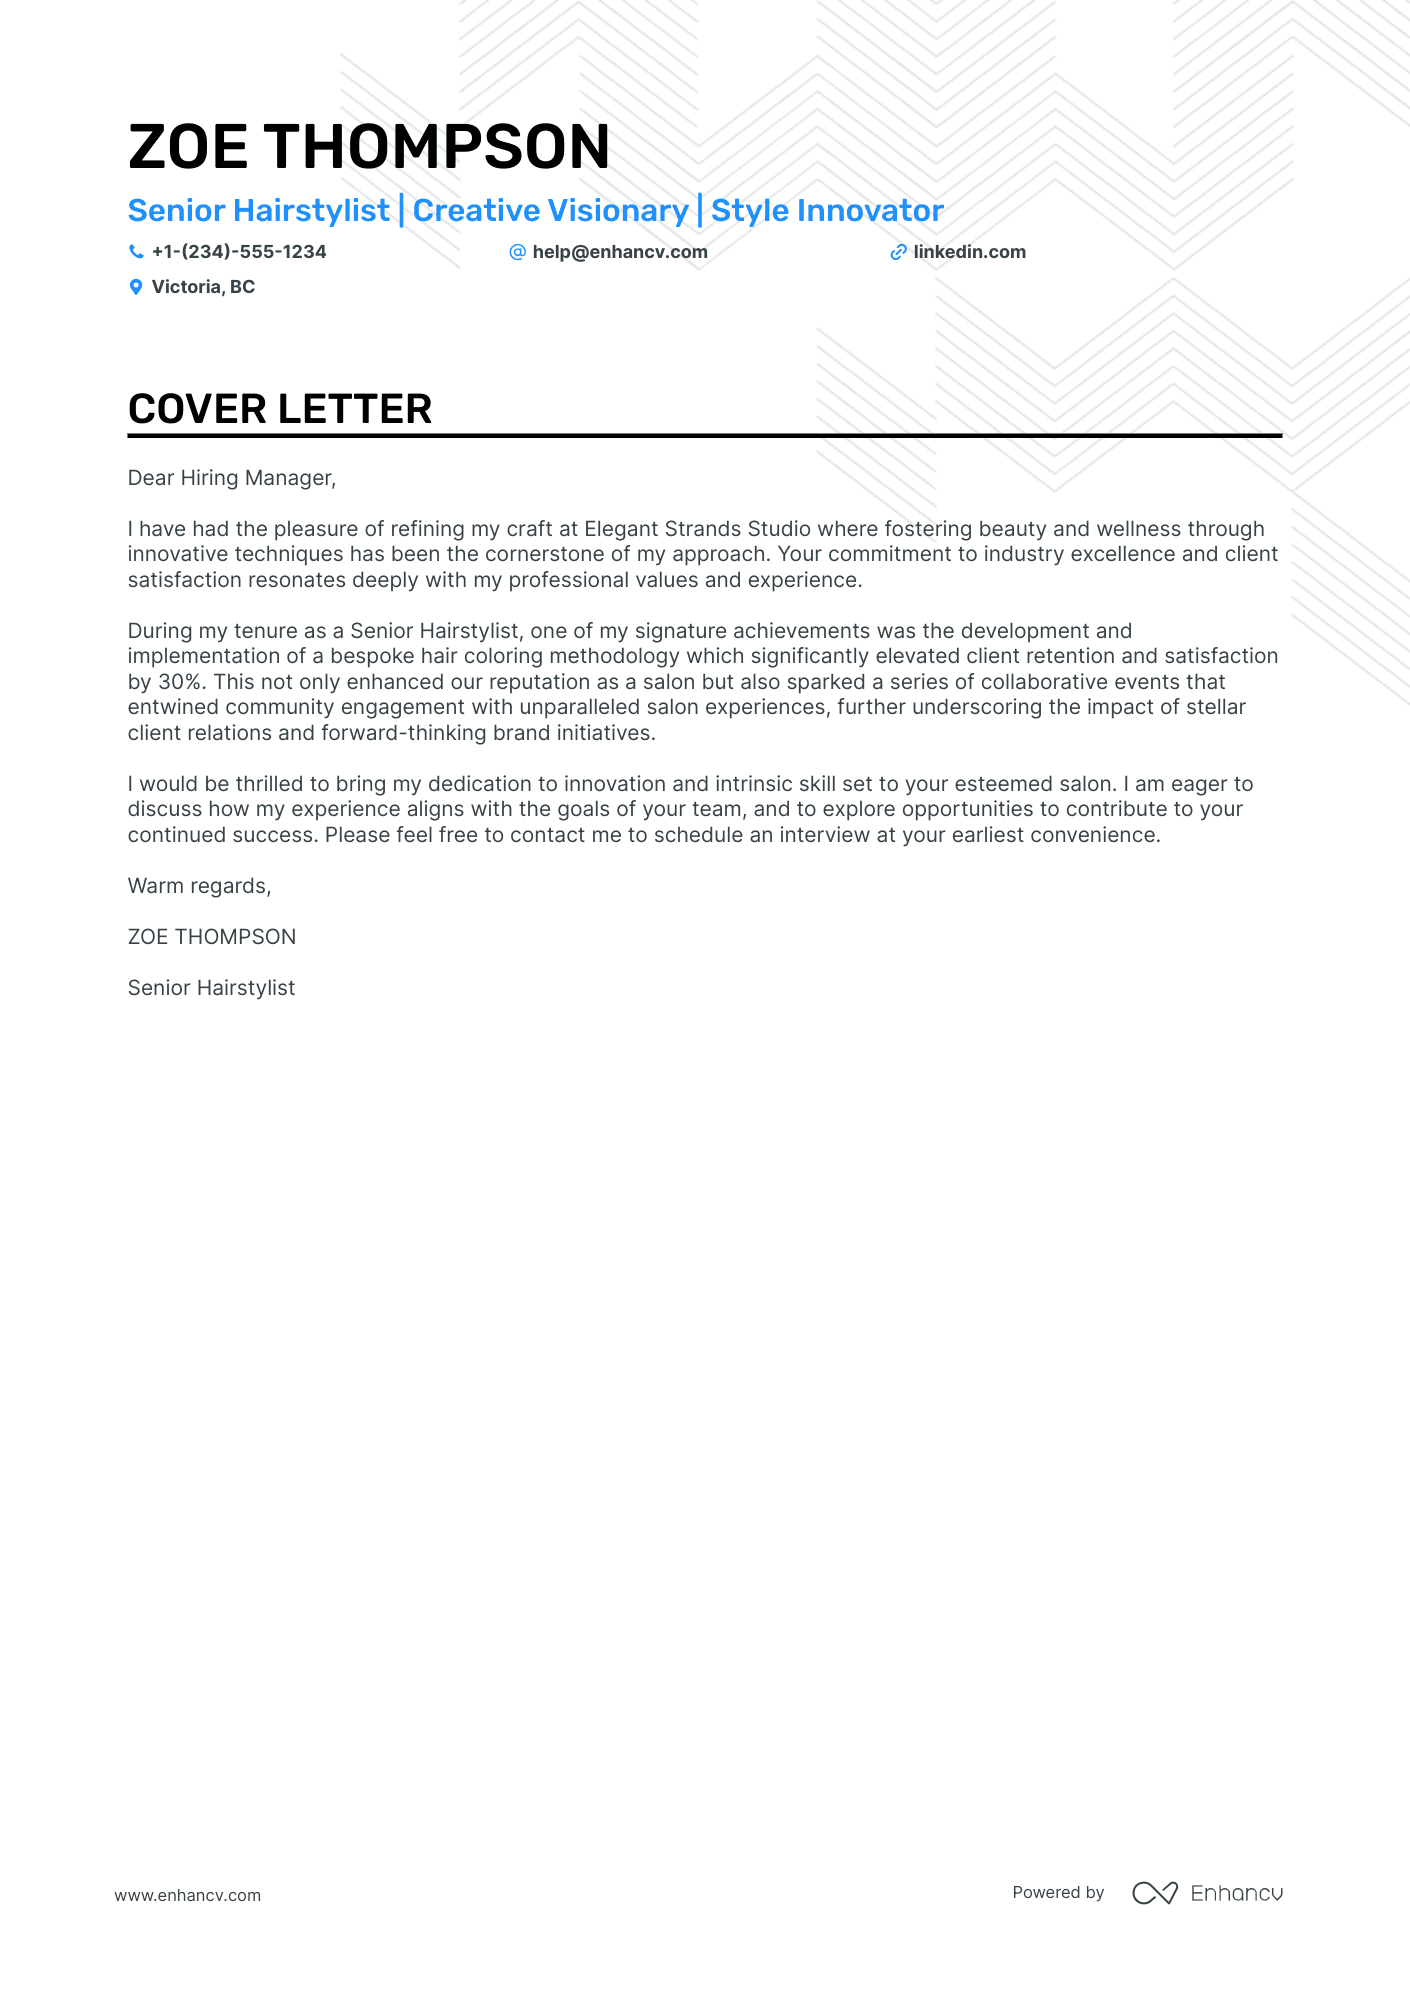 Hair Stylist cover letter